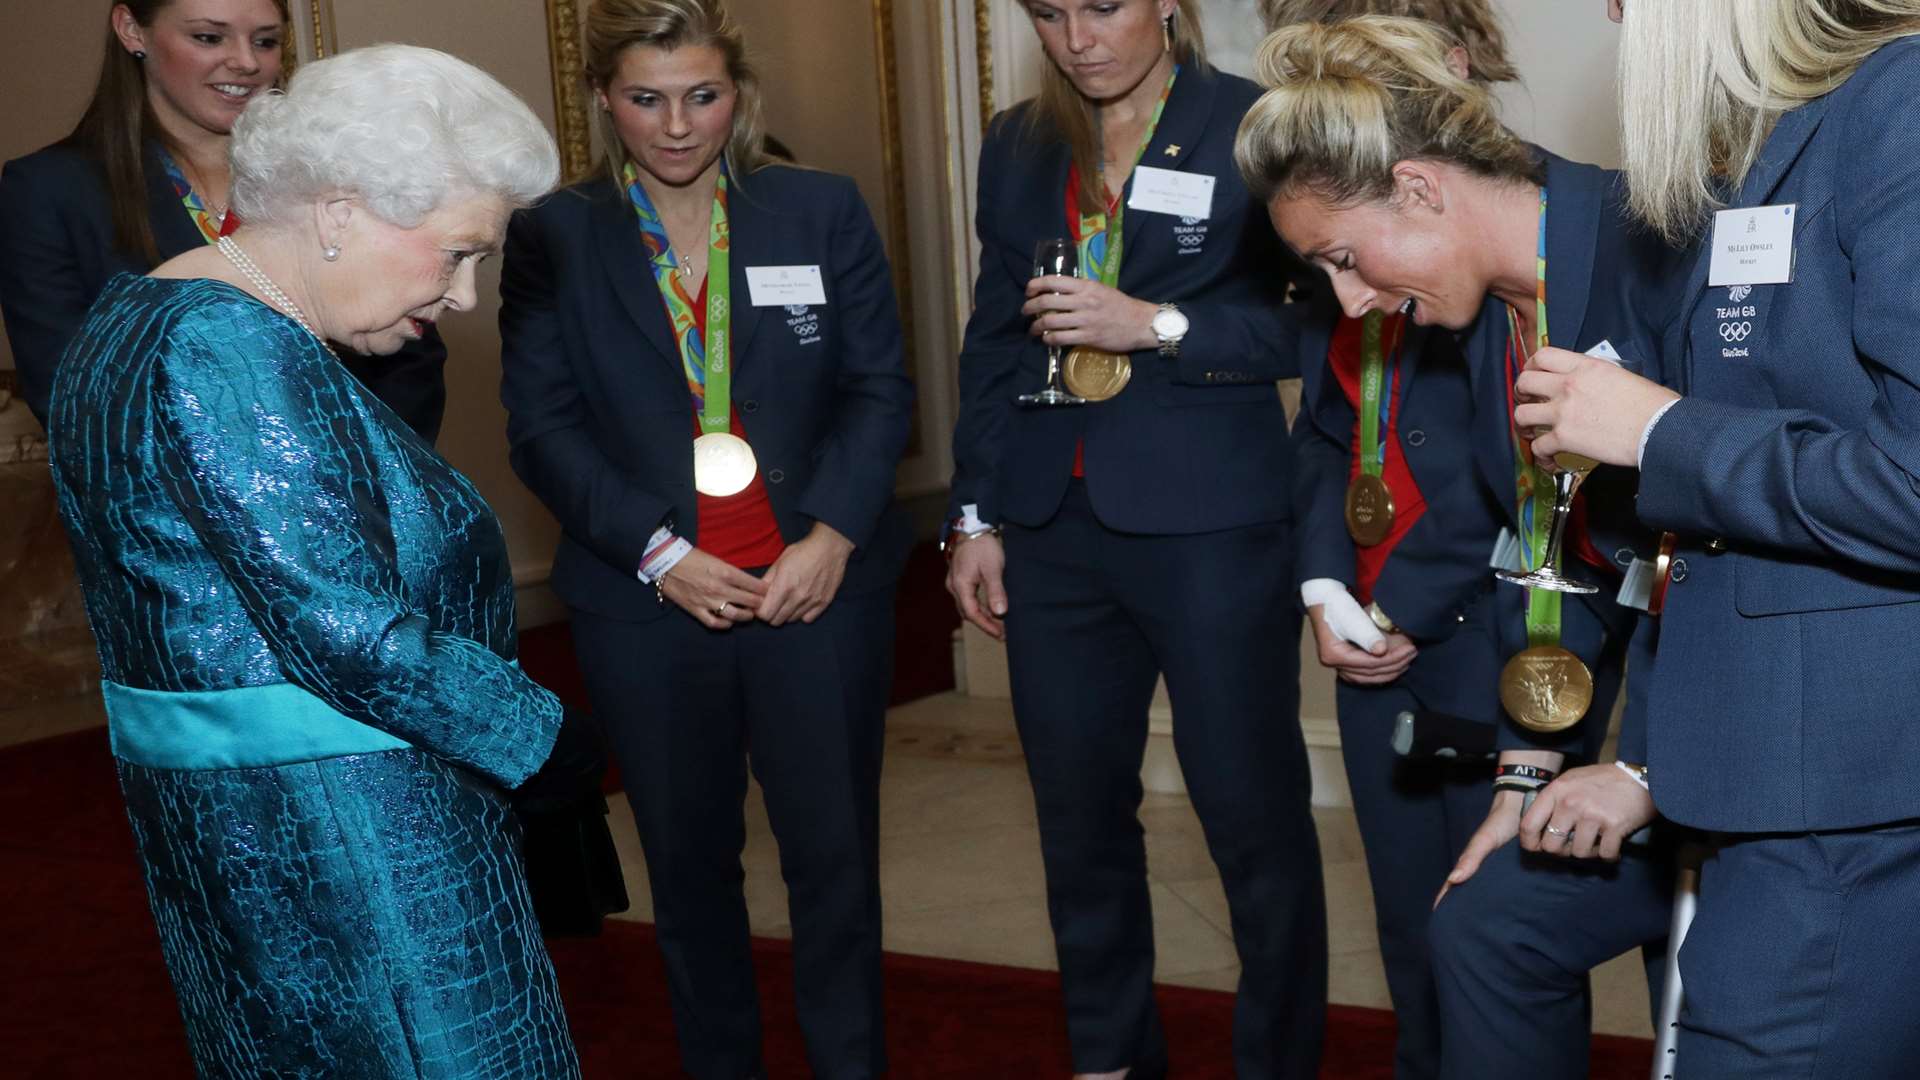 Susannah Townsend and the GB Hockey heroes meet Her Majesty the Queen. Picture: Yui Mok/PA Wire